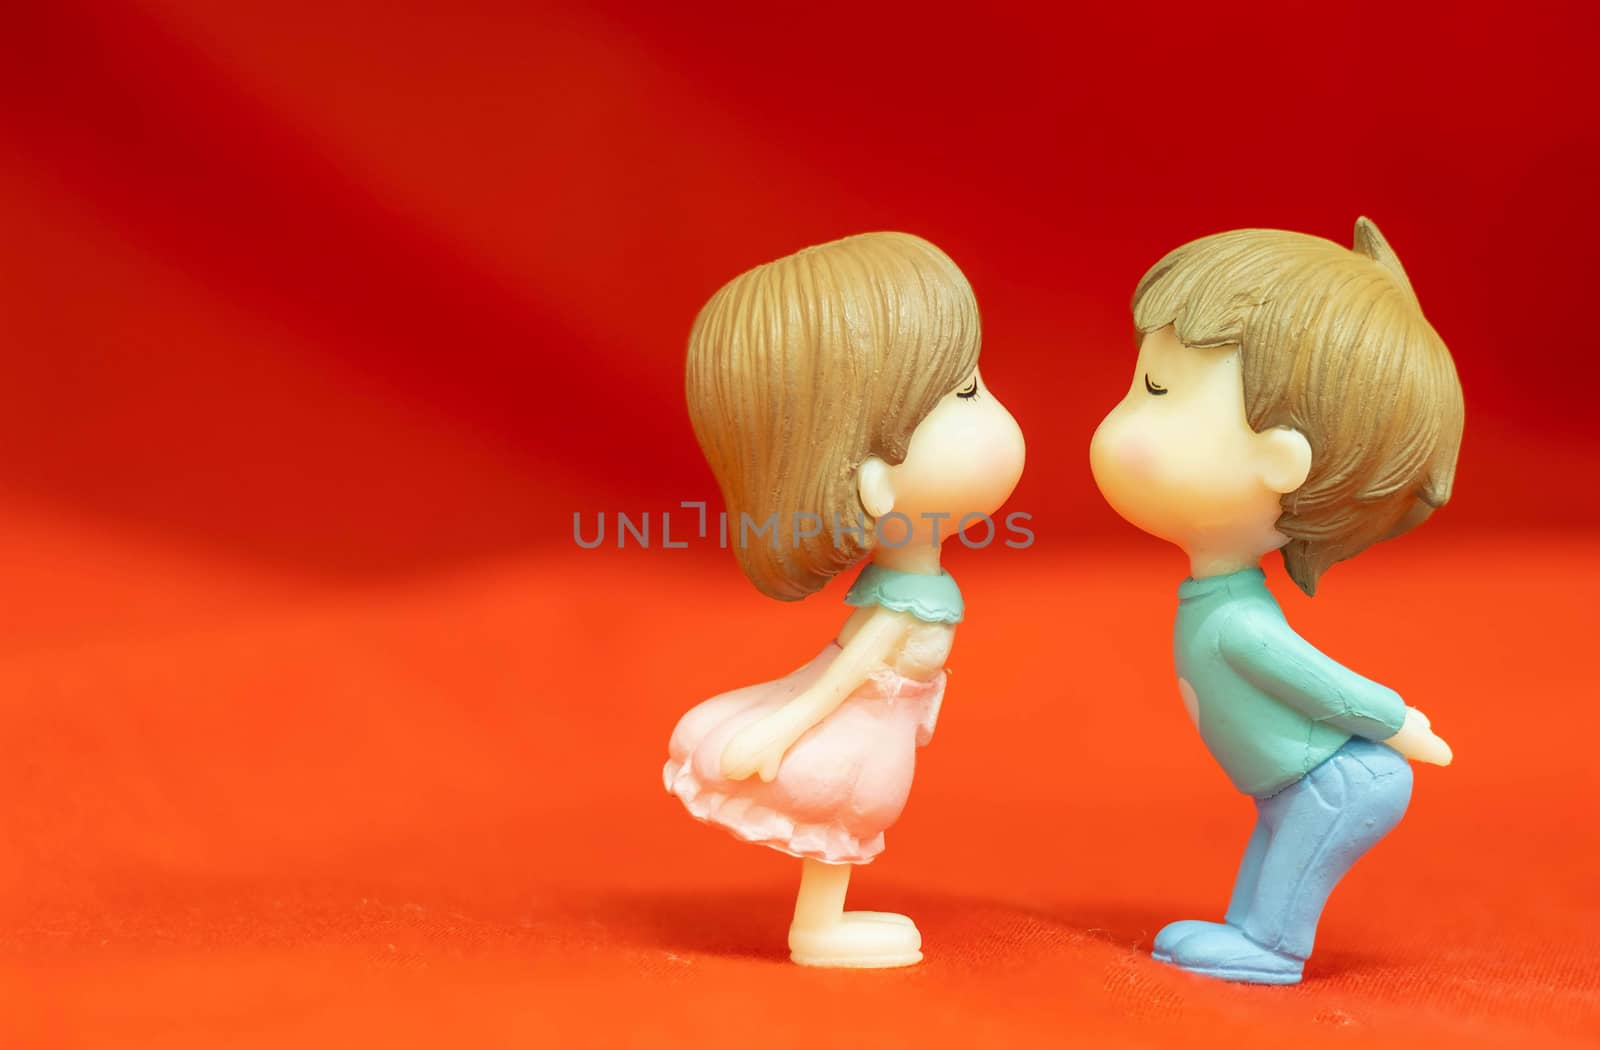 The Miniature Couple dolls Boy and Girl Romantic Kiss on Red Background for valentine's Day Concept